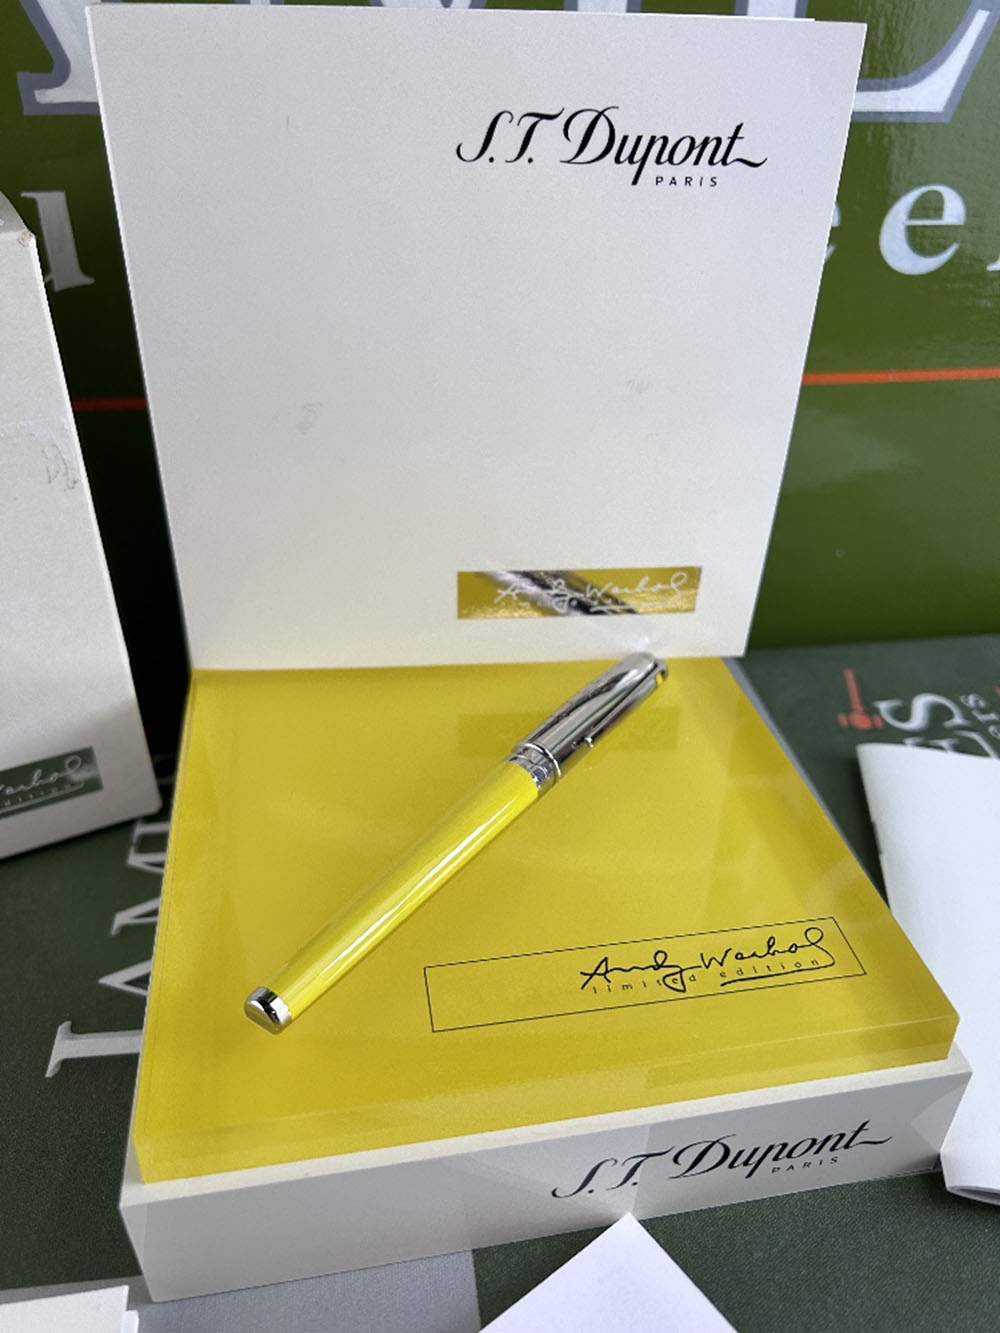 SOLD VIA BUY IT NOW PLEASE DO NOT BID-Rare St Dupont Andy Warhol Fountain Pen Yellow Box & Papers - Image 3 of 13